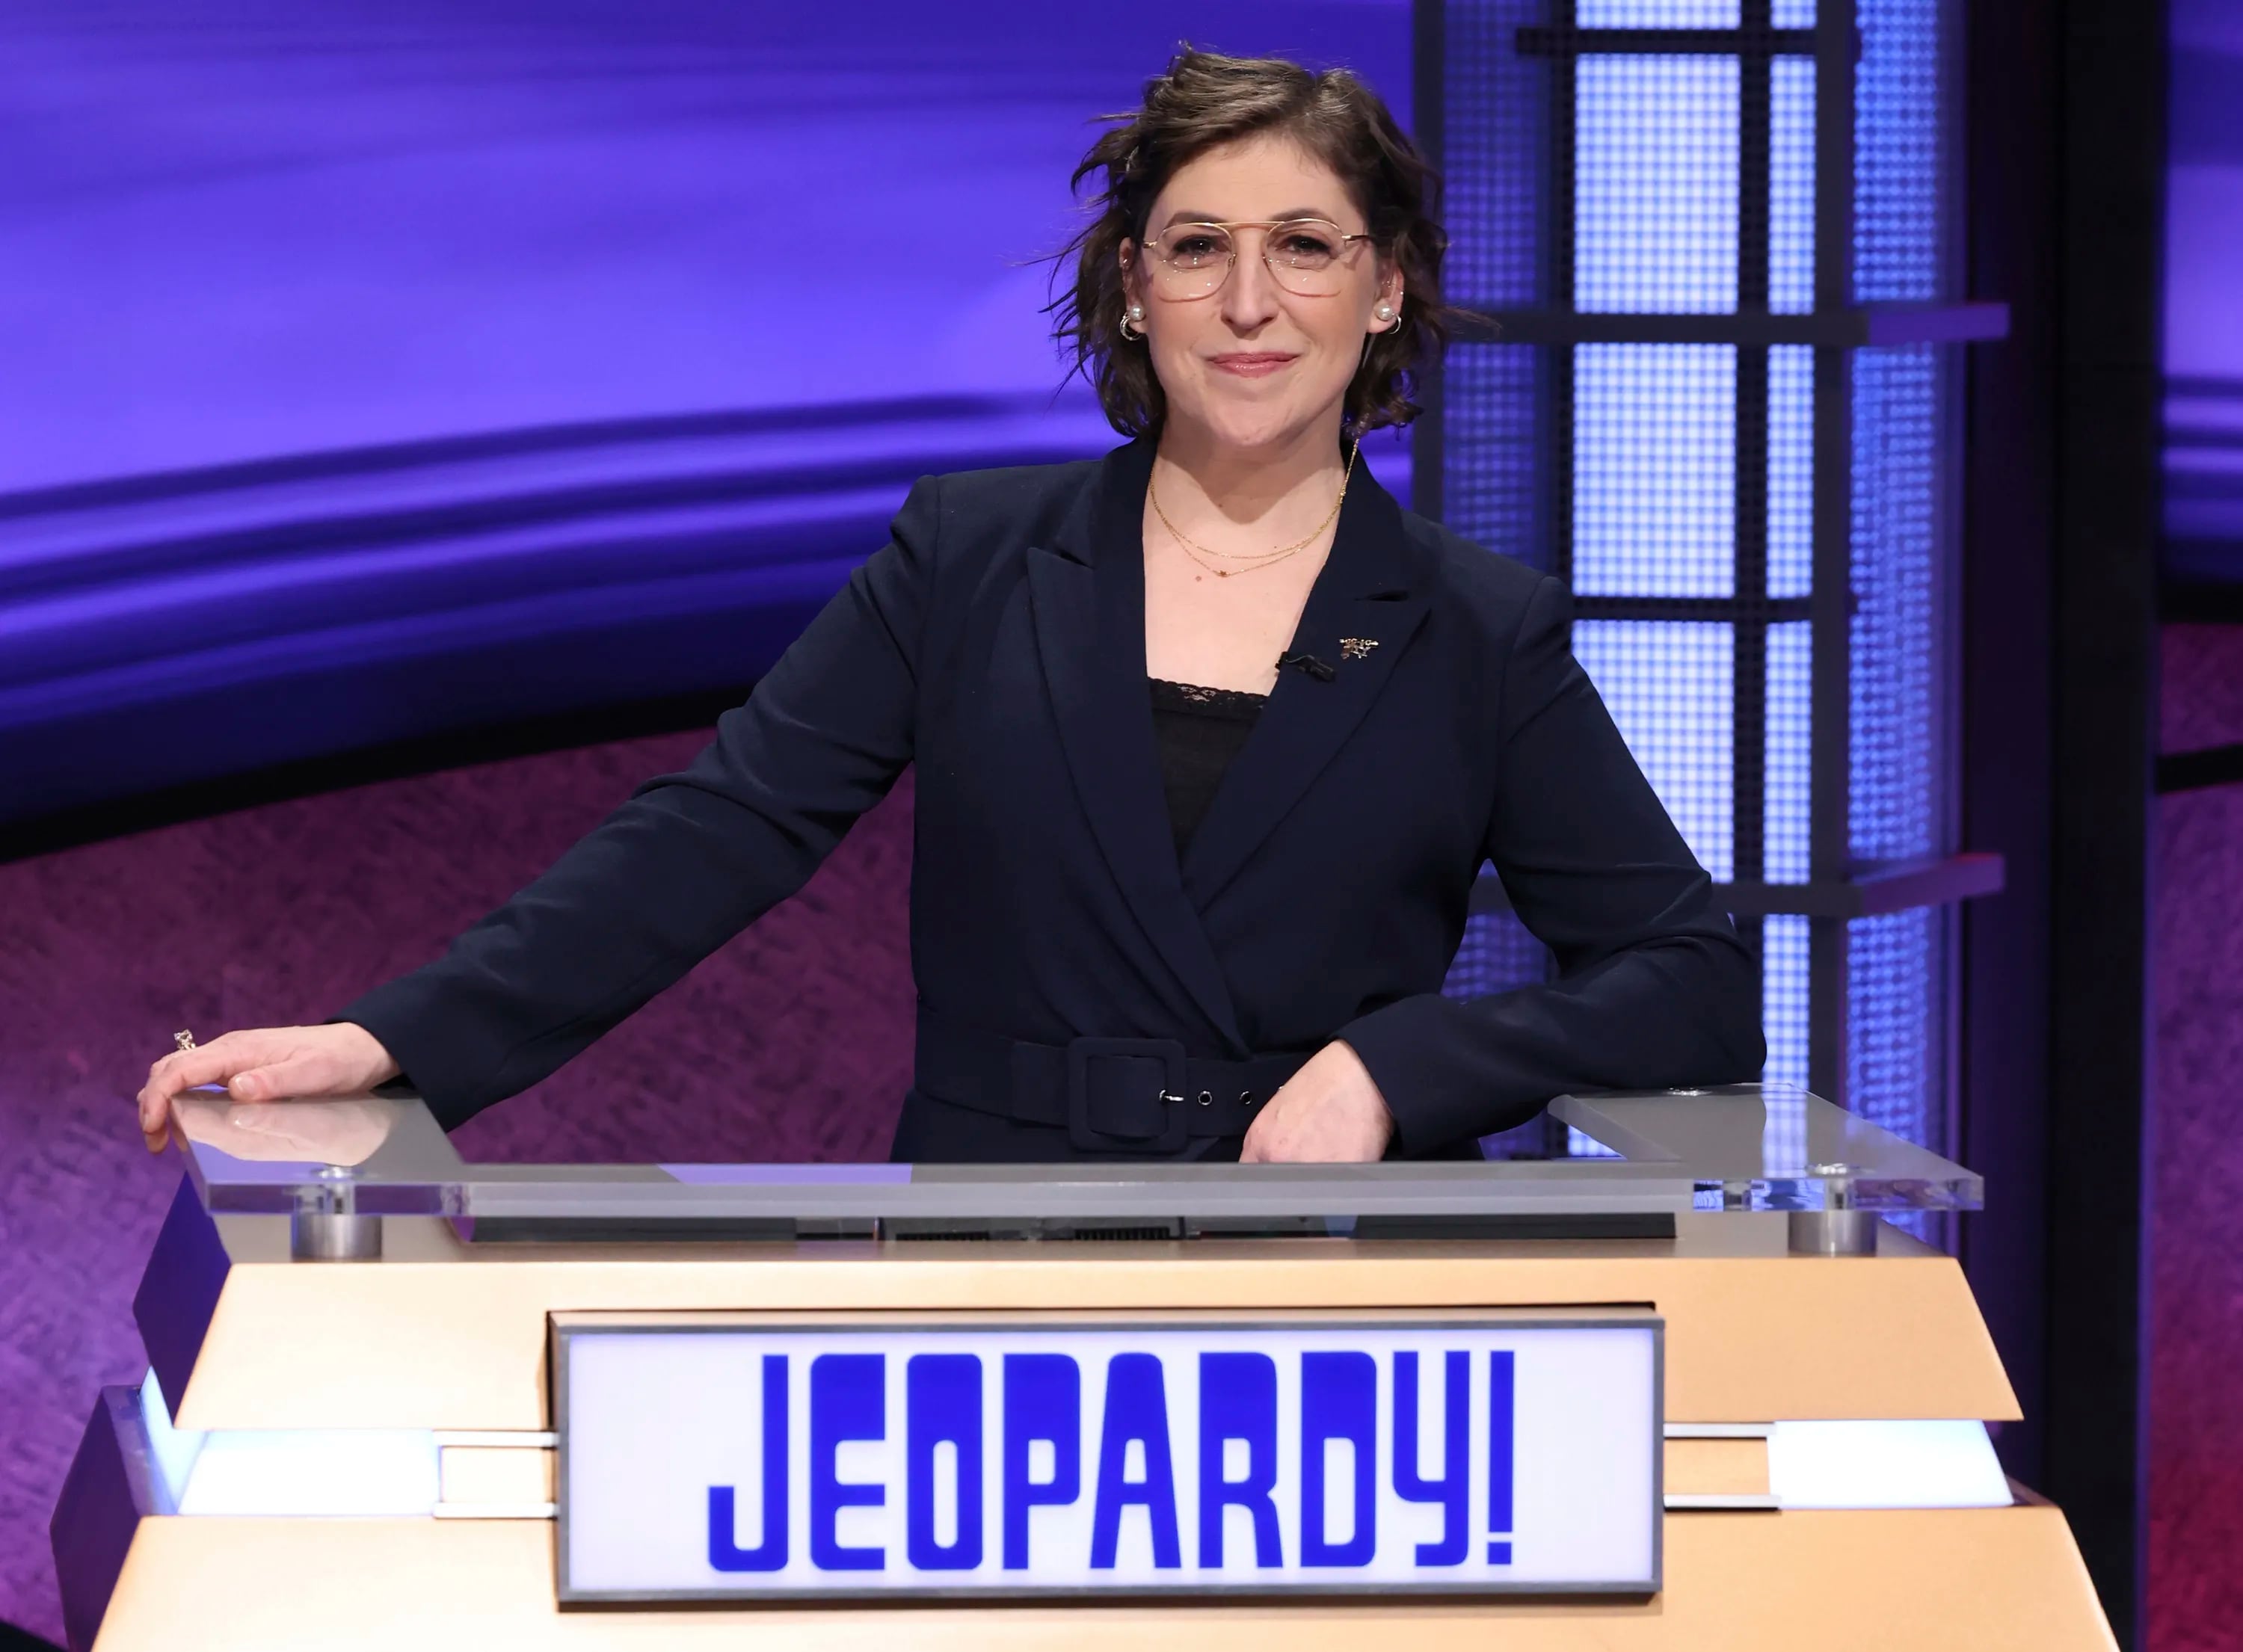 Who Is Mike Richards, the New Guest Host of 'Jeopardy!'? - Get to